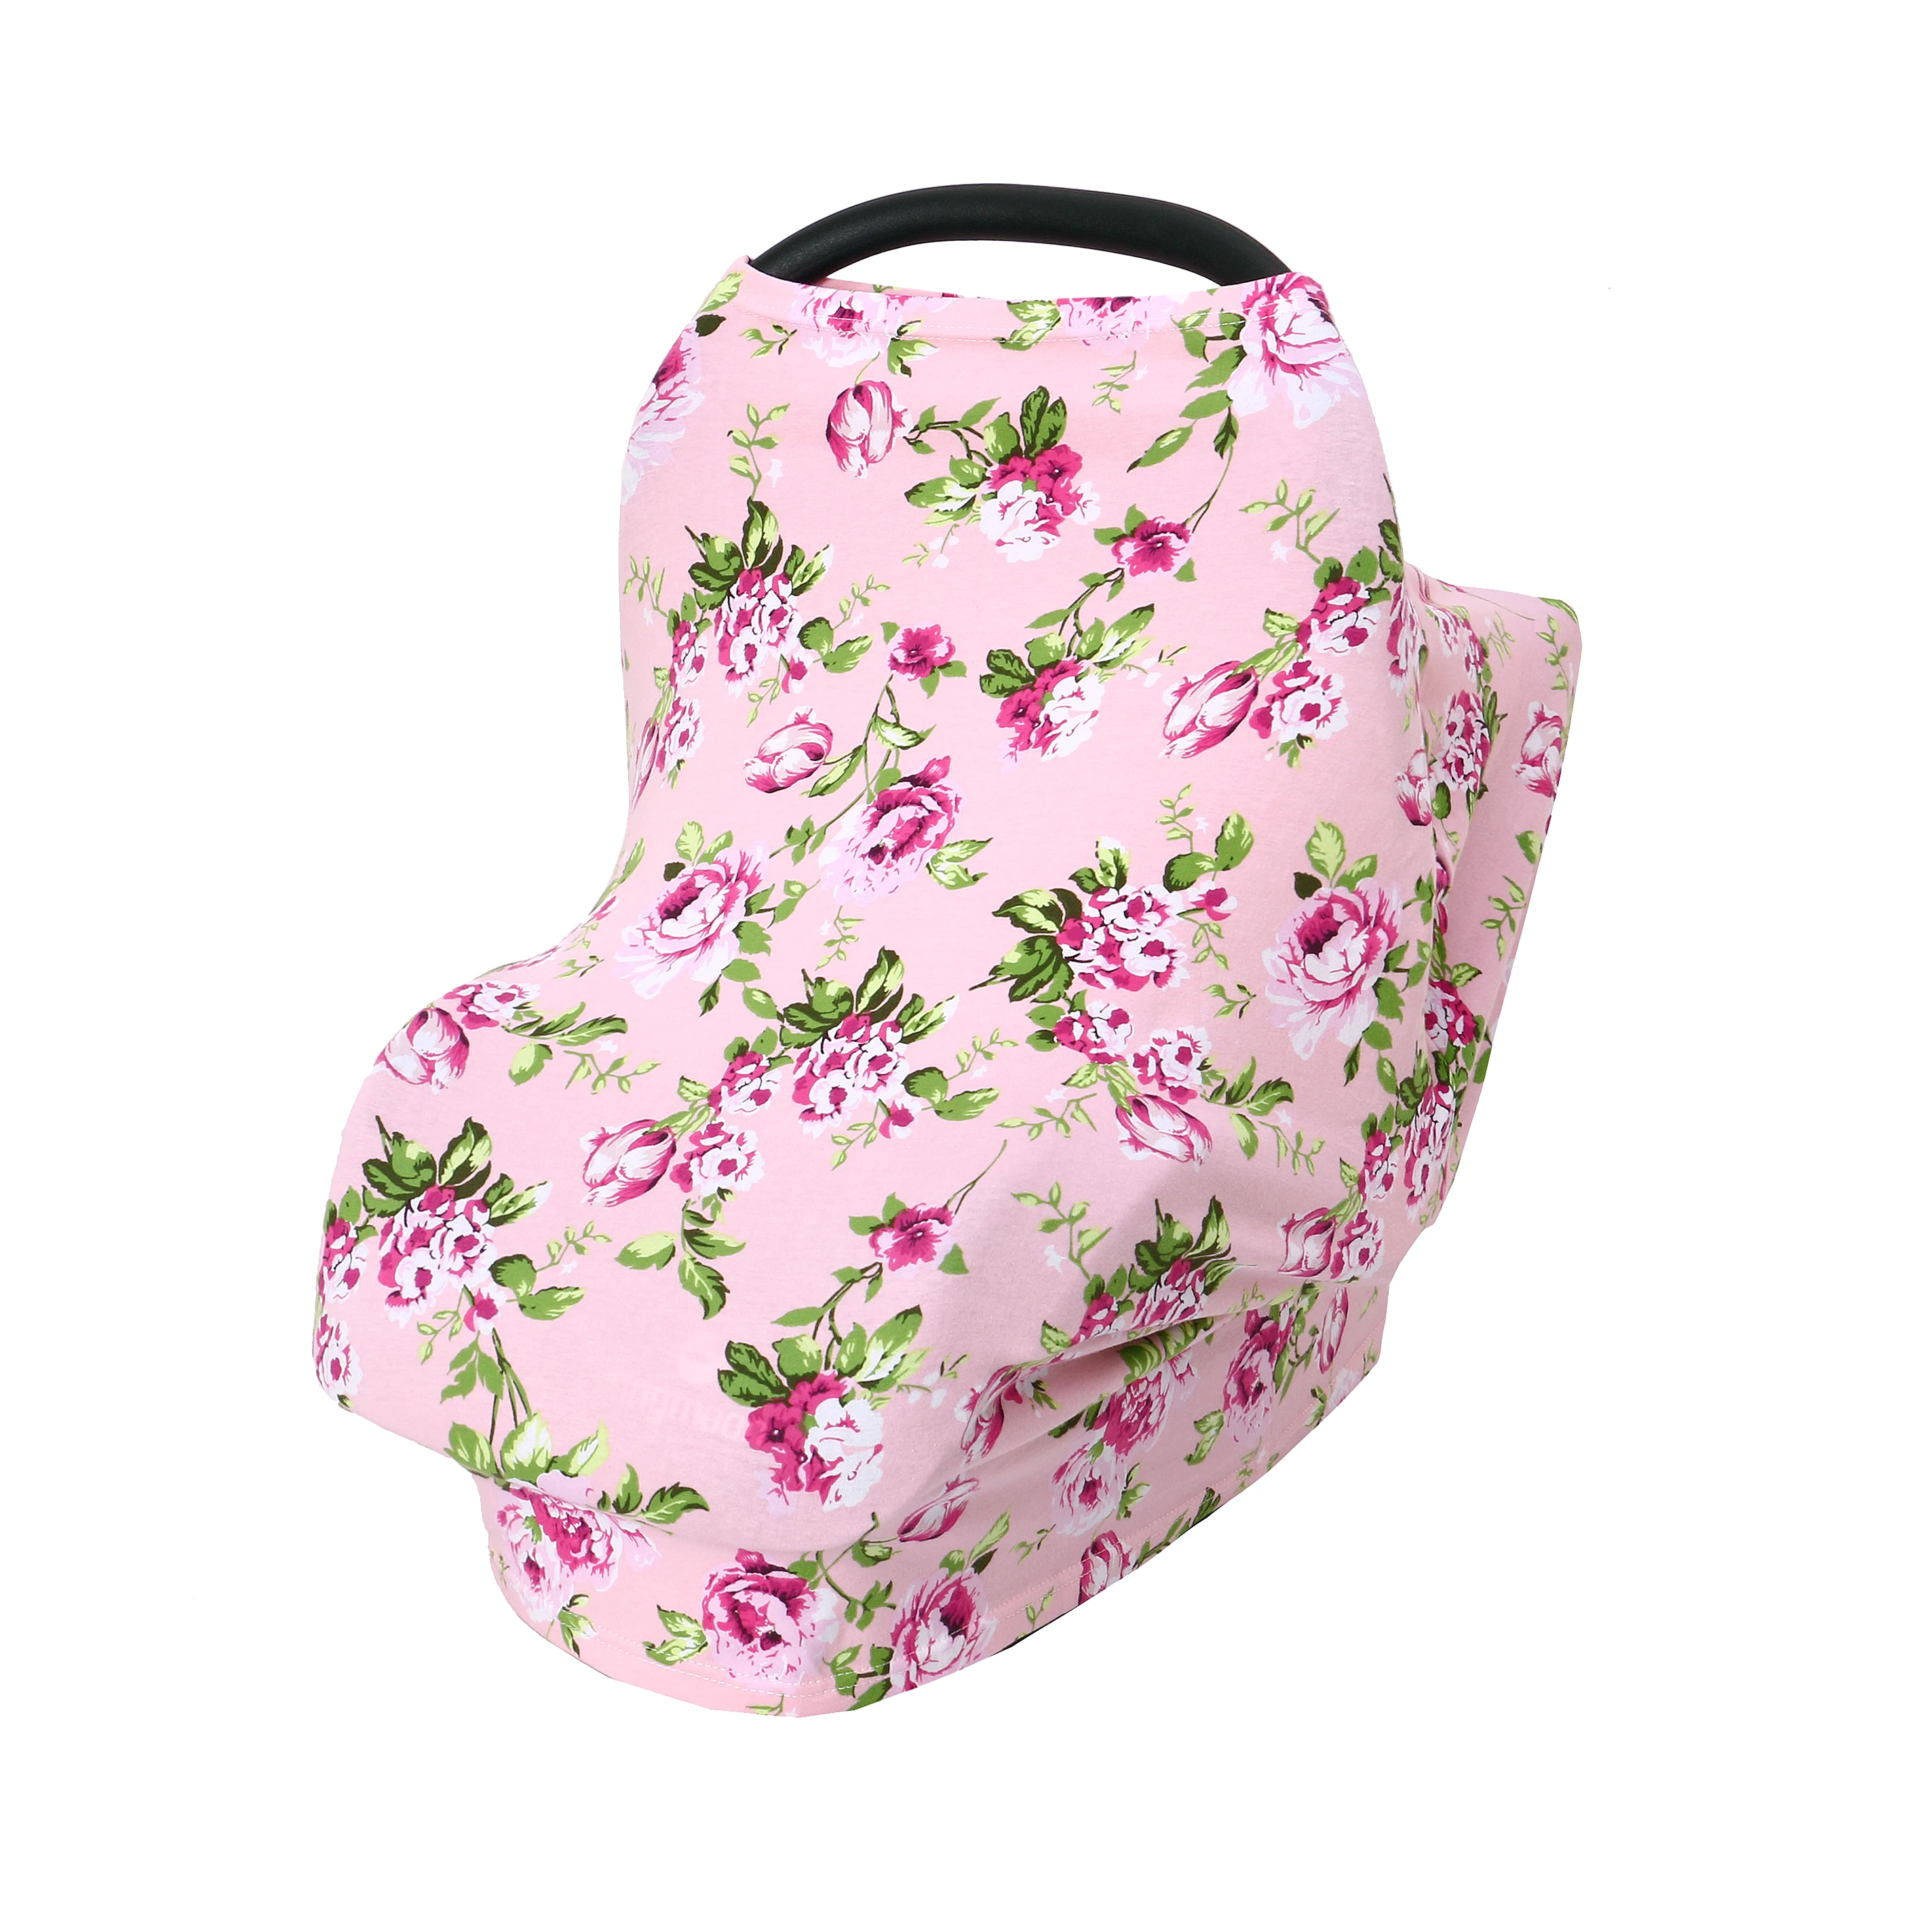 

Multiuse washable cotton stroller cover canopy shopping cart cover breastfeeding toddler baby nursing cover